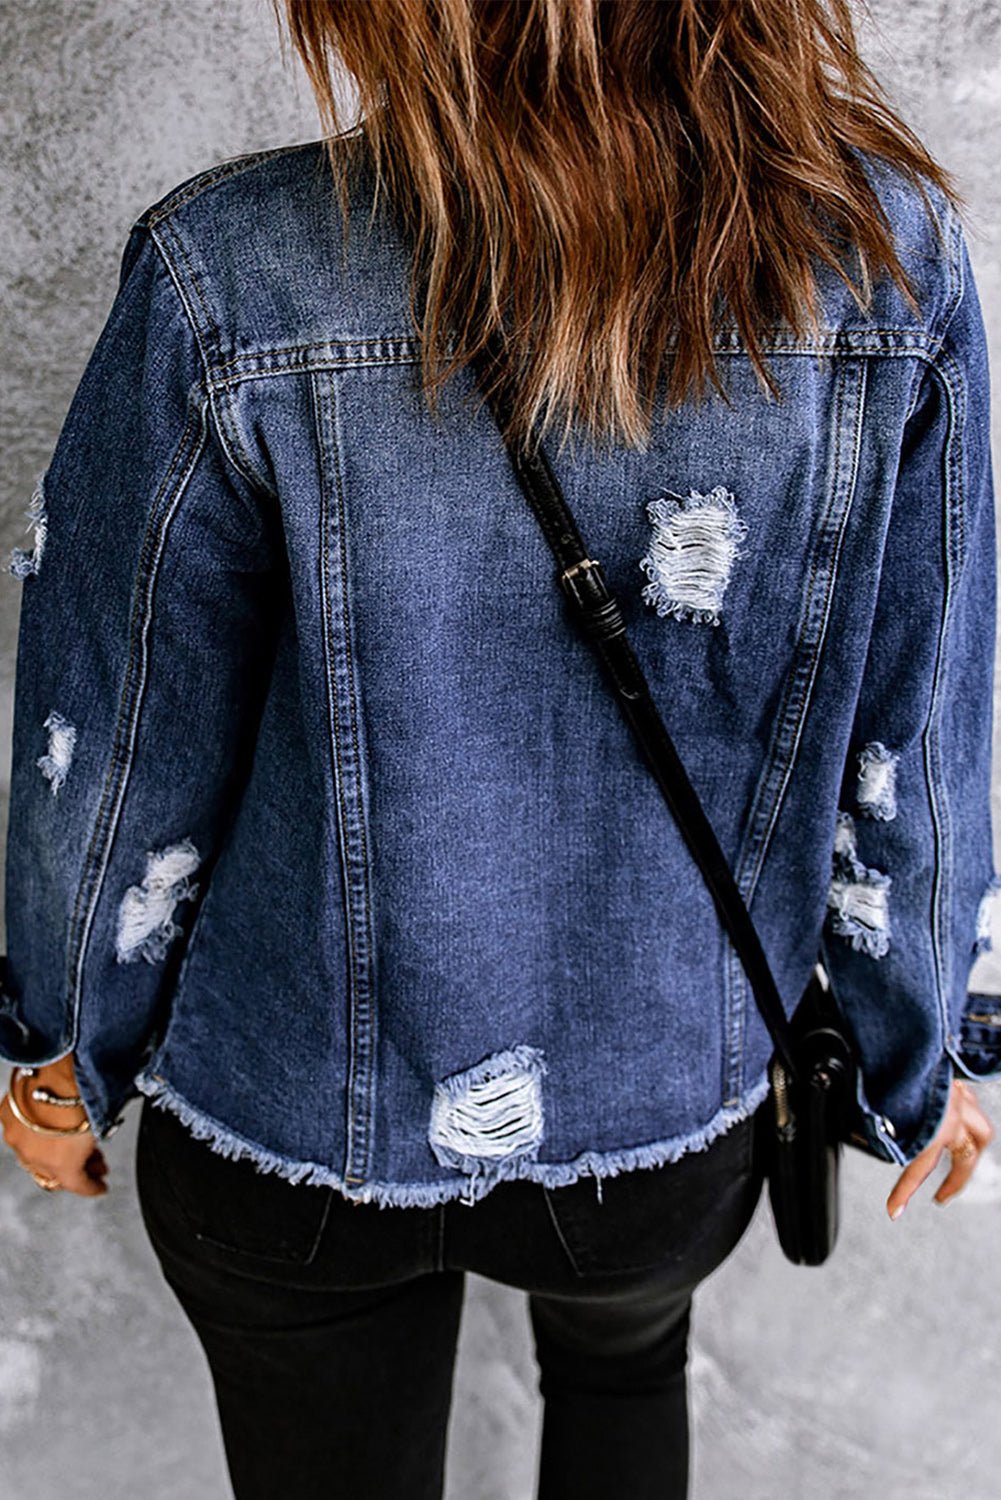 Mixed Print Distressed Button Front Denim Jacket - Guy Christopher